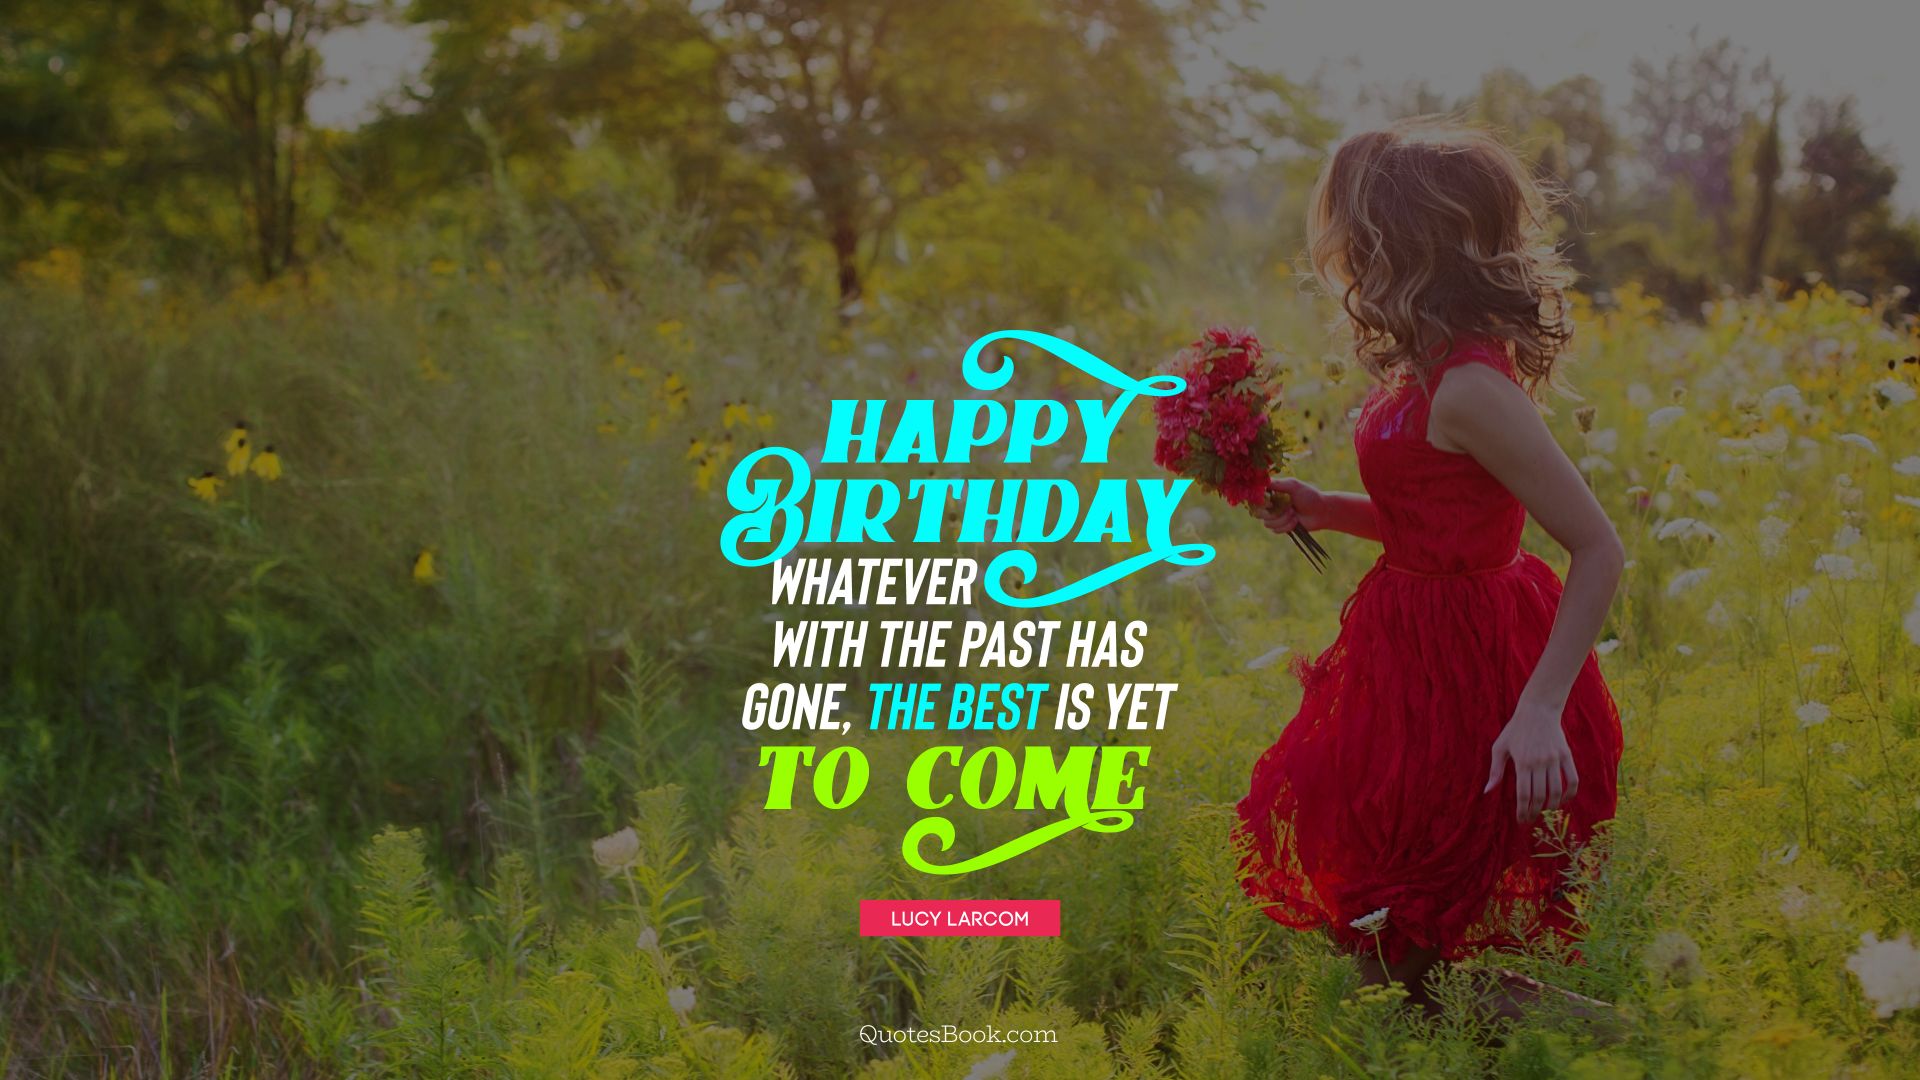 Happy birthday! Whatever with the past has gone, the best is yet to come. - Quote by Lucy Larcom